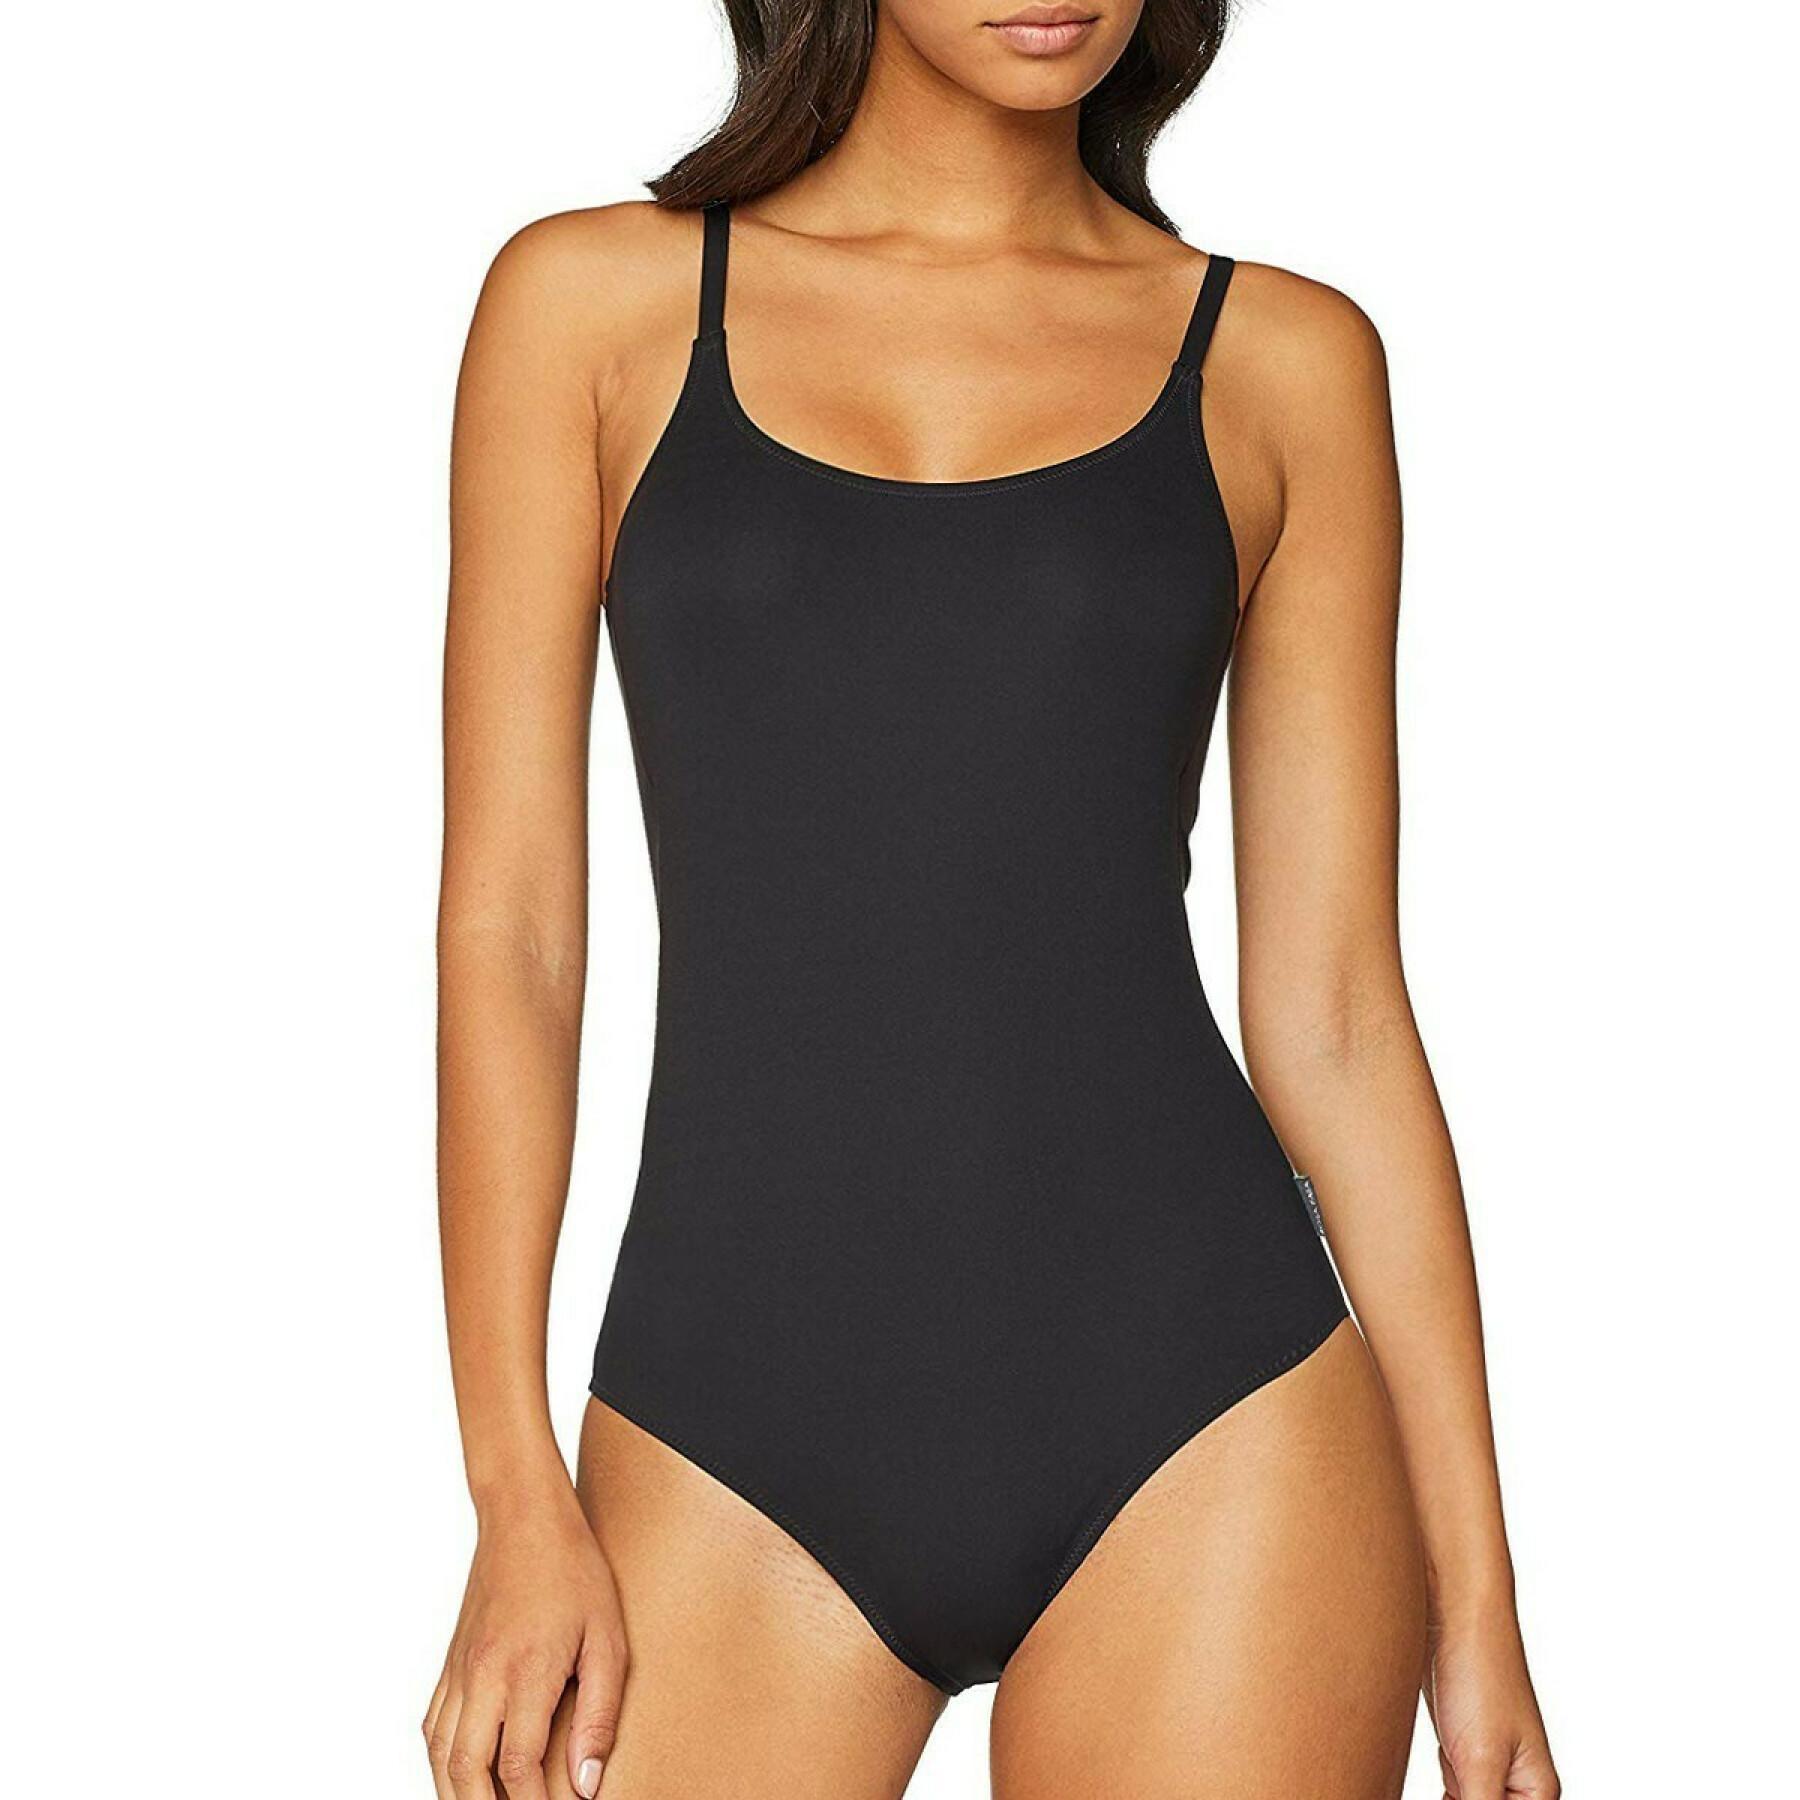 One-piece underwired swimsuit for women Rosa Faia perfect suit